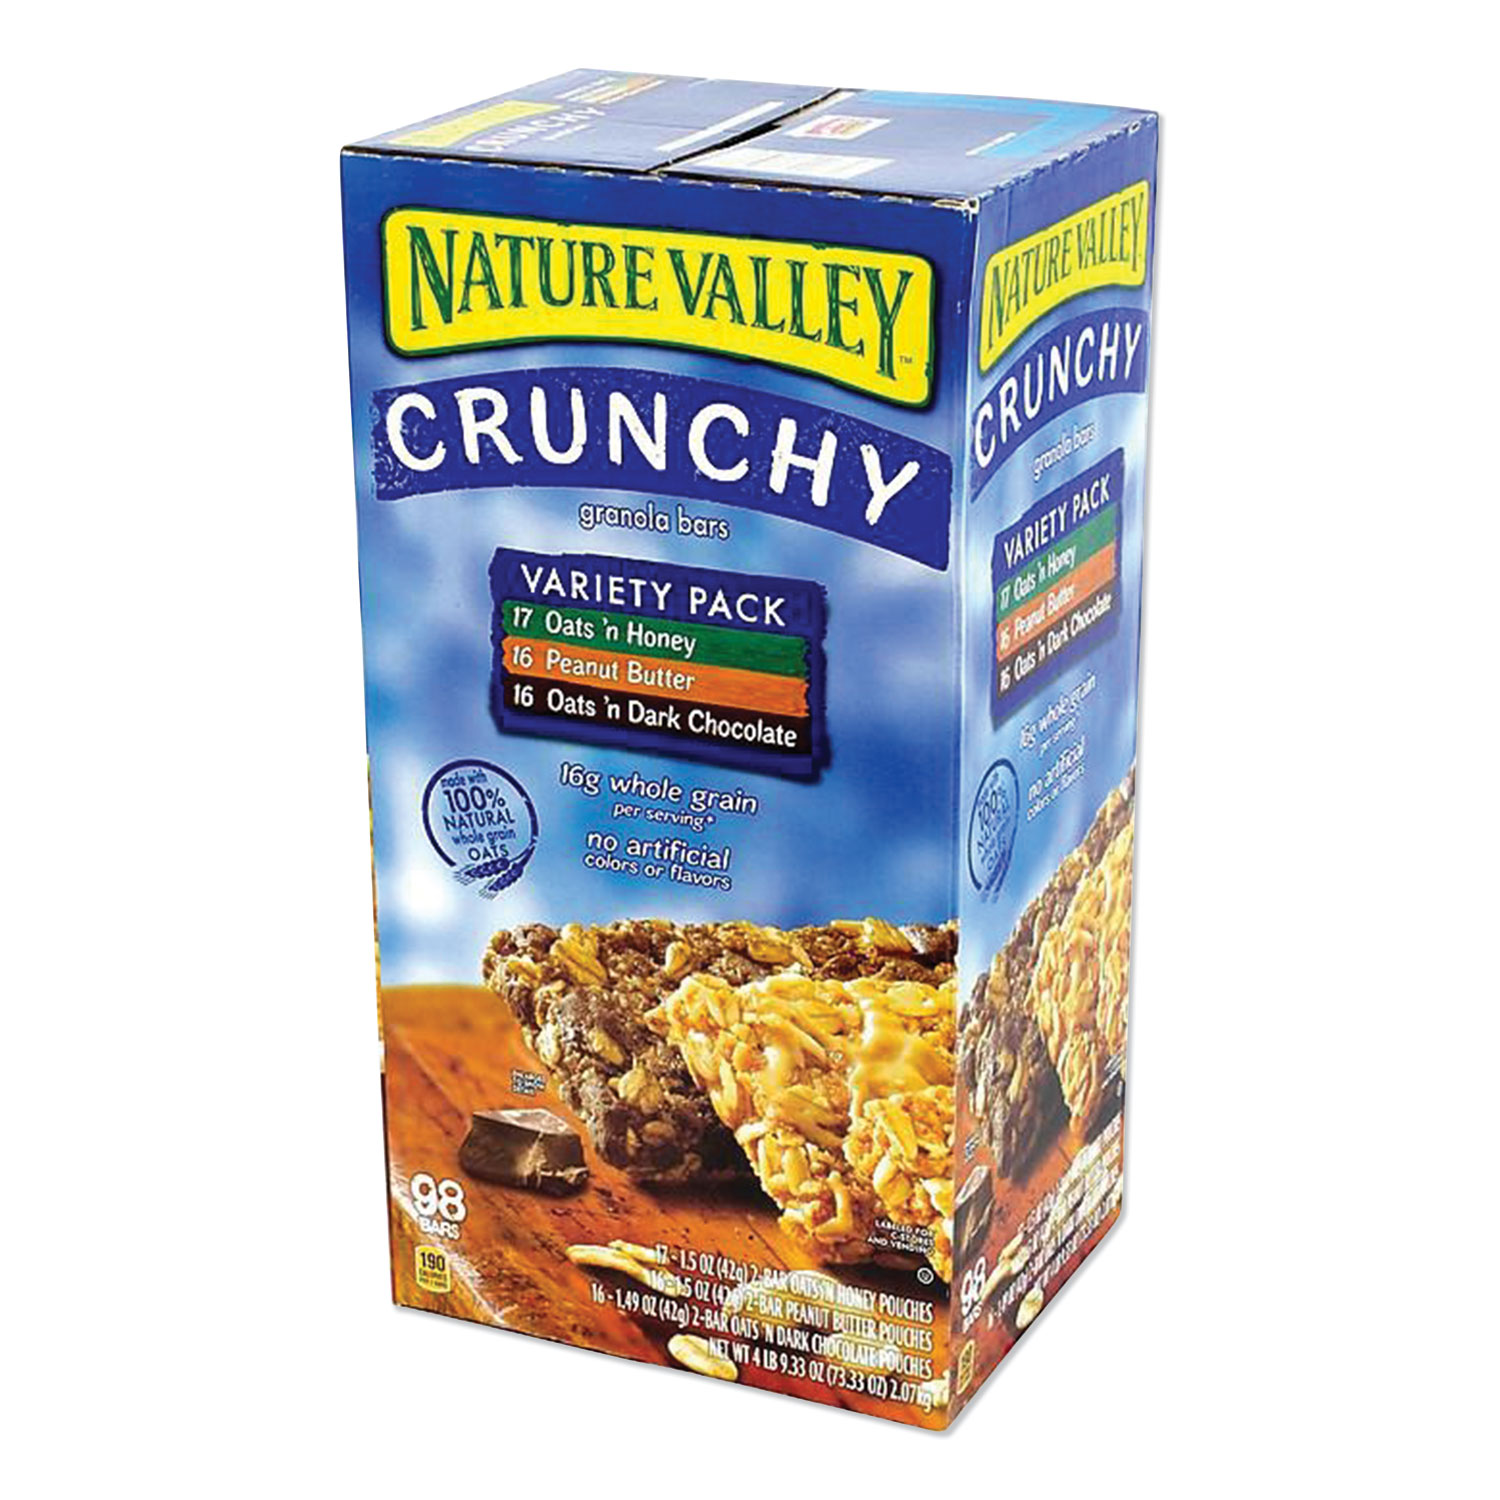  Nature Valley GEM44136 Granola Bars, Assorted Crunchy Bars, 1.5 oz Pouch, 2 Bars/Pouch, 49 Packs/Box (NVL1787279) 